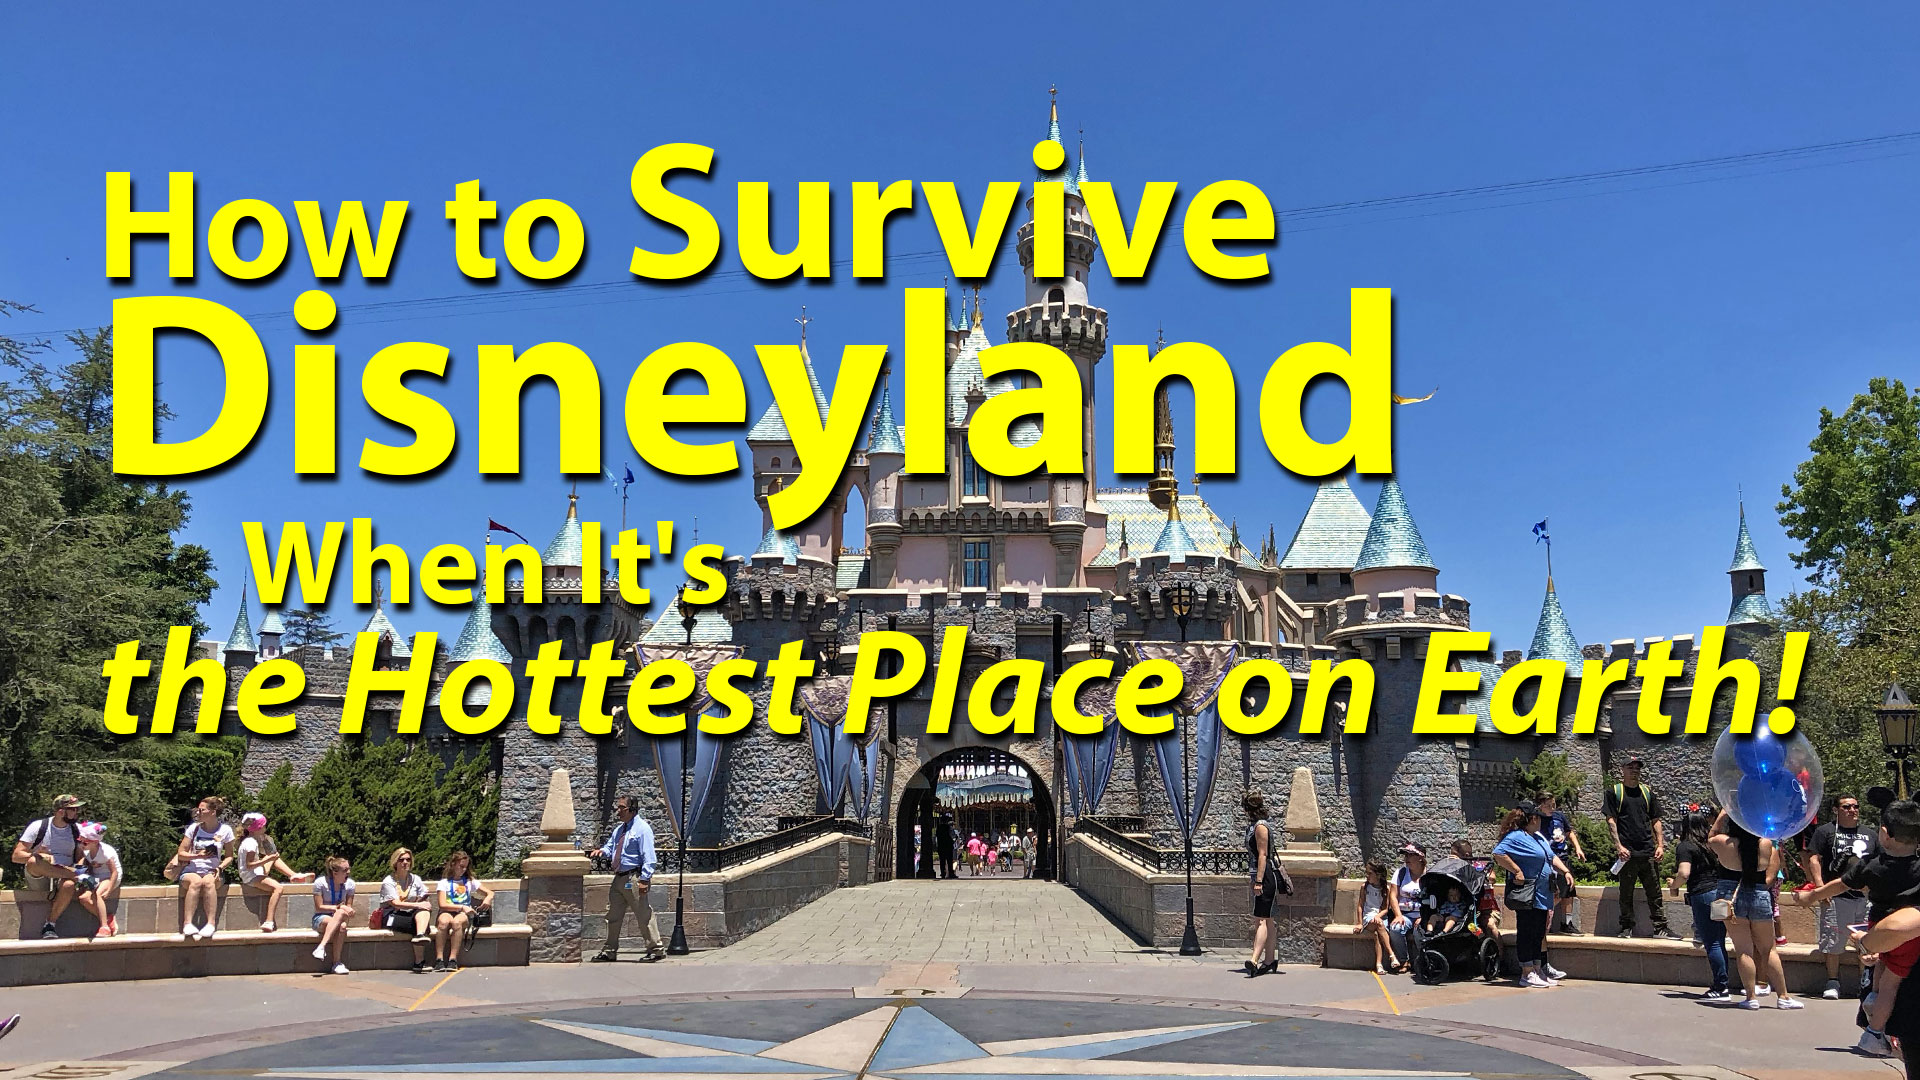 How to Survive Disneyland When It’s the Hottest Place on Earth